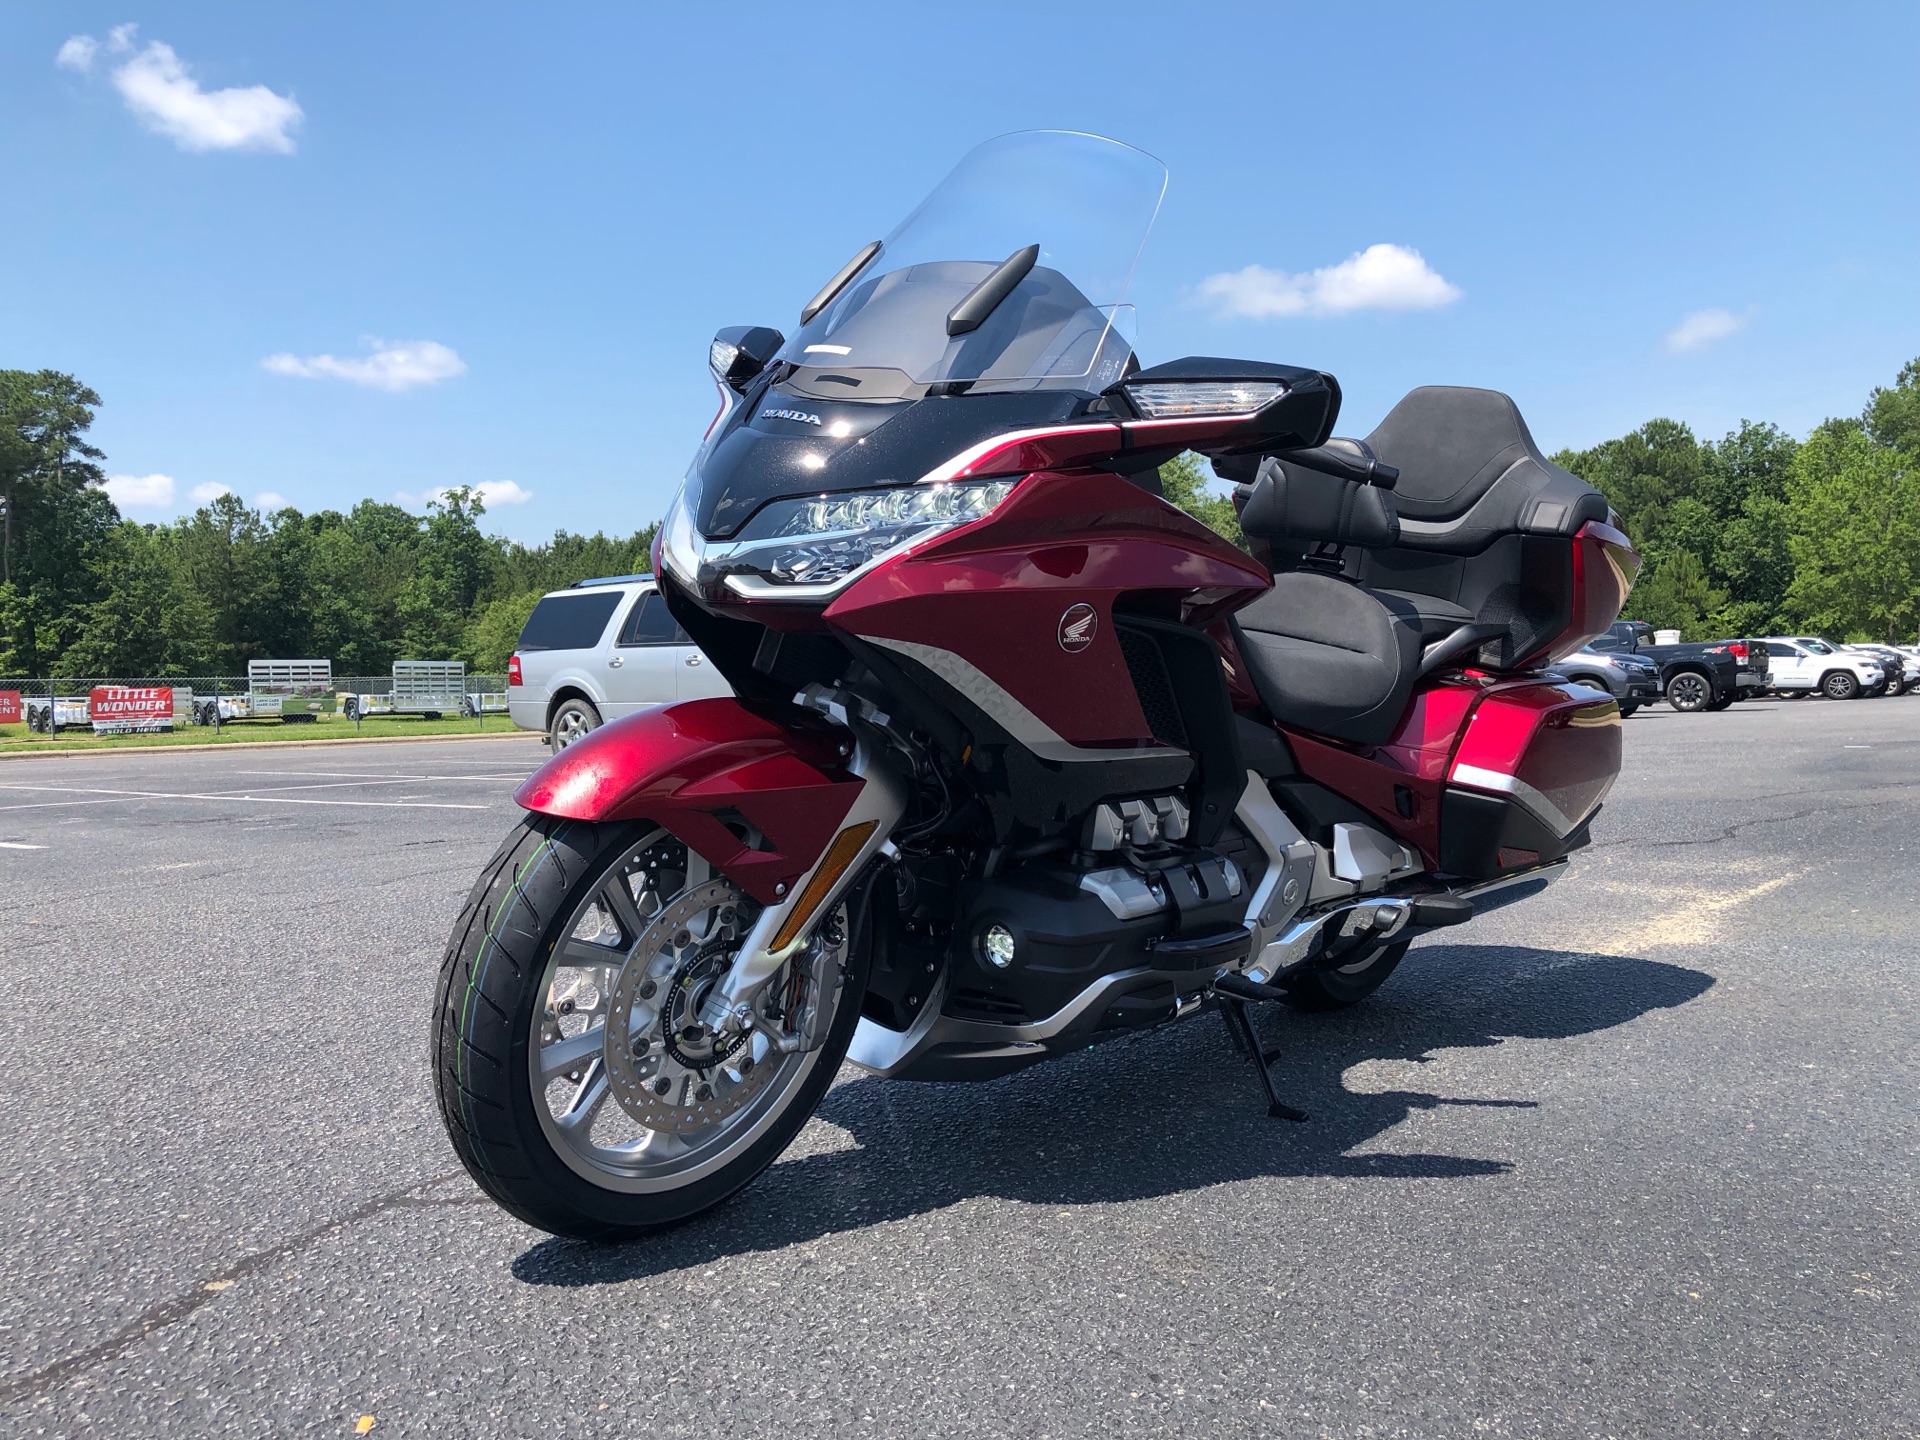 2021 Honda Gold Wing Tour Automatic DCT in Greenville, North Carolina - Photo 5